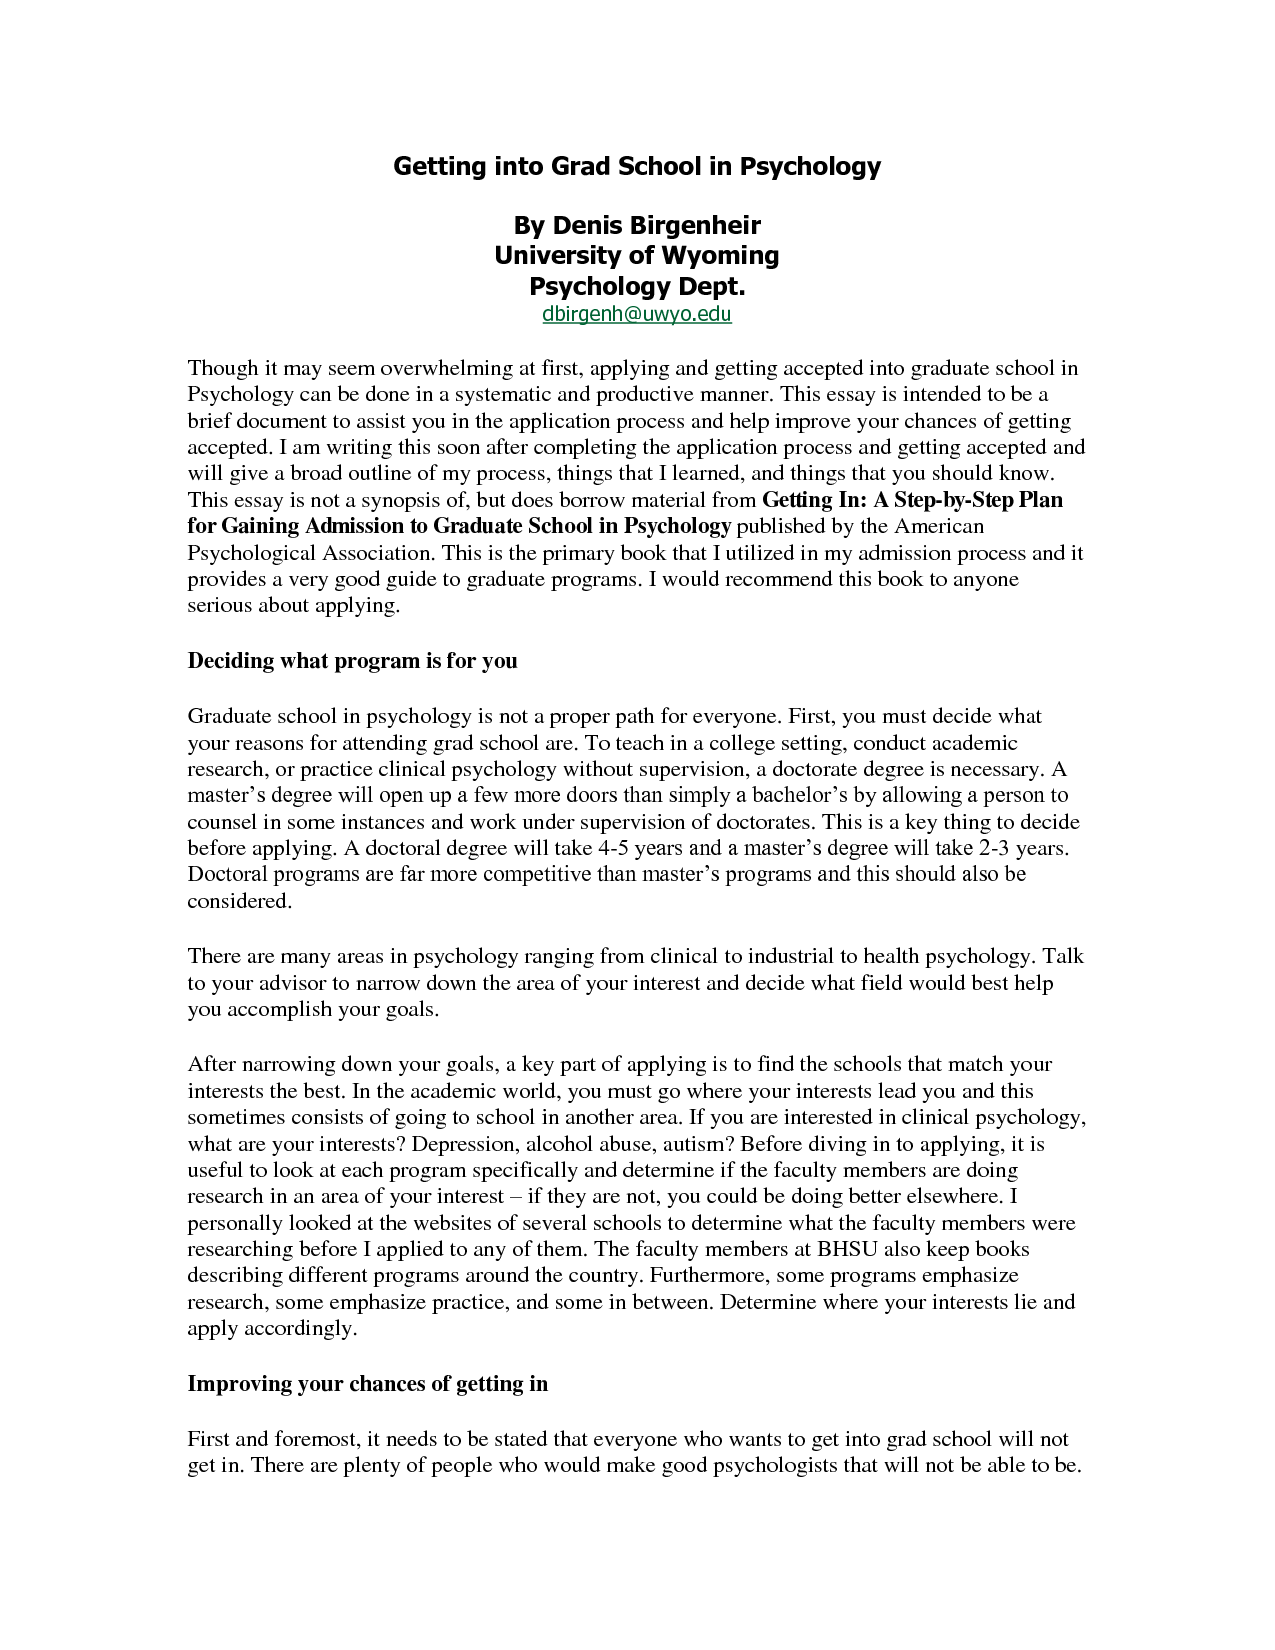 Masters admission essay how to write